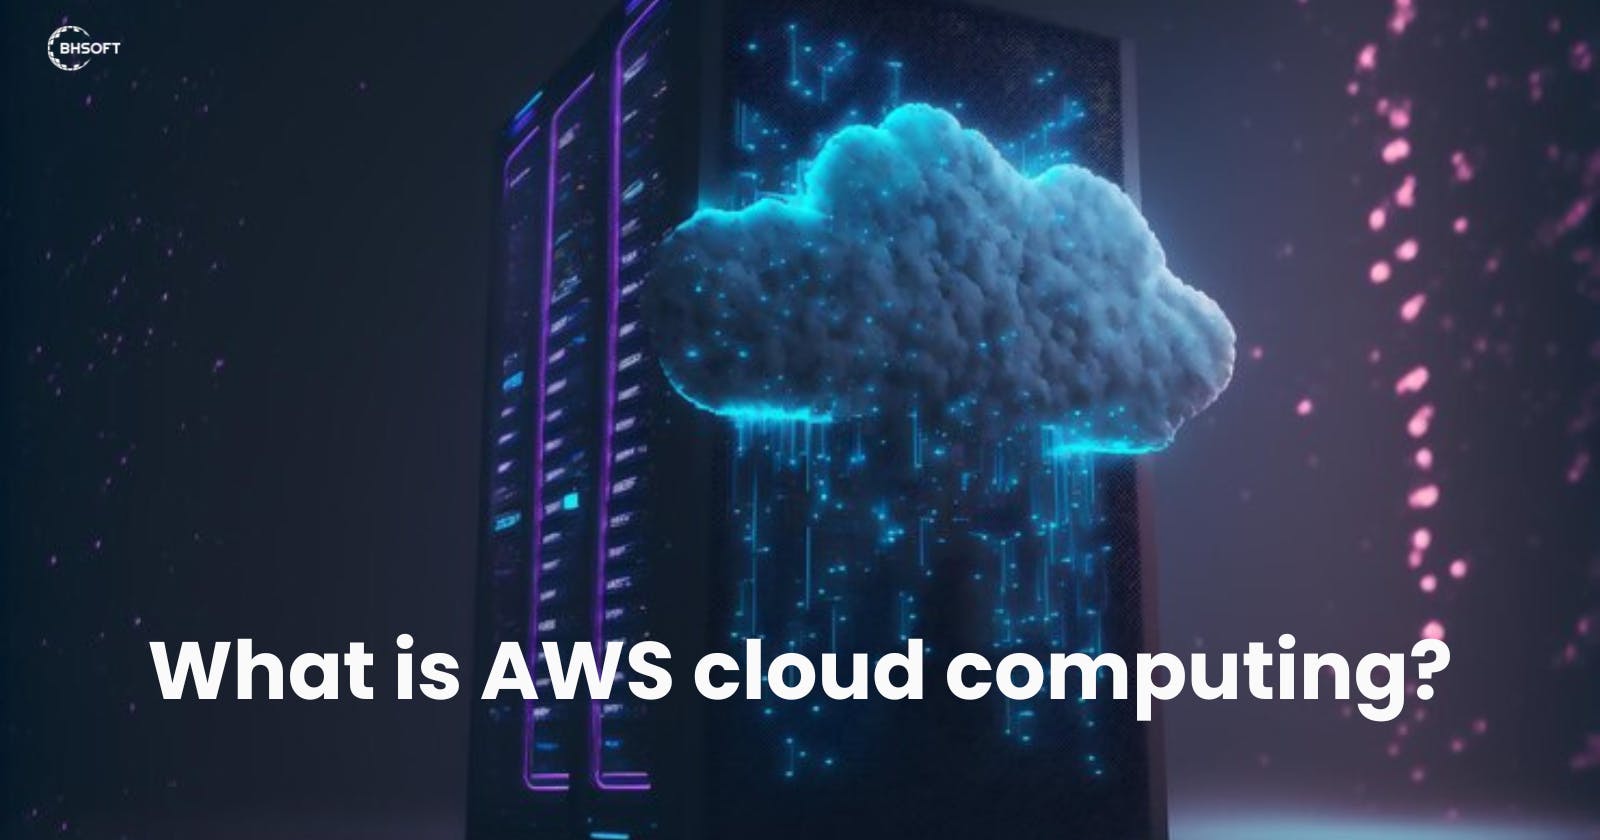 What is AWS cloud computing?